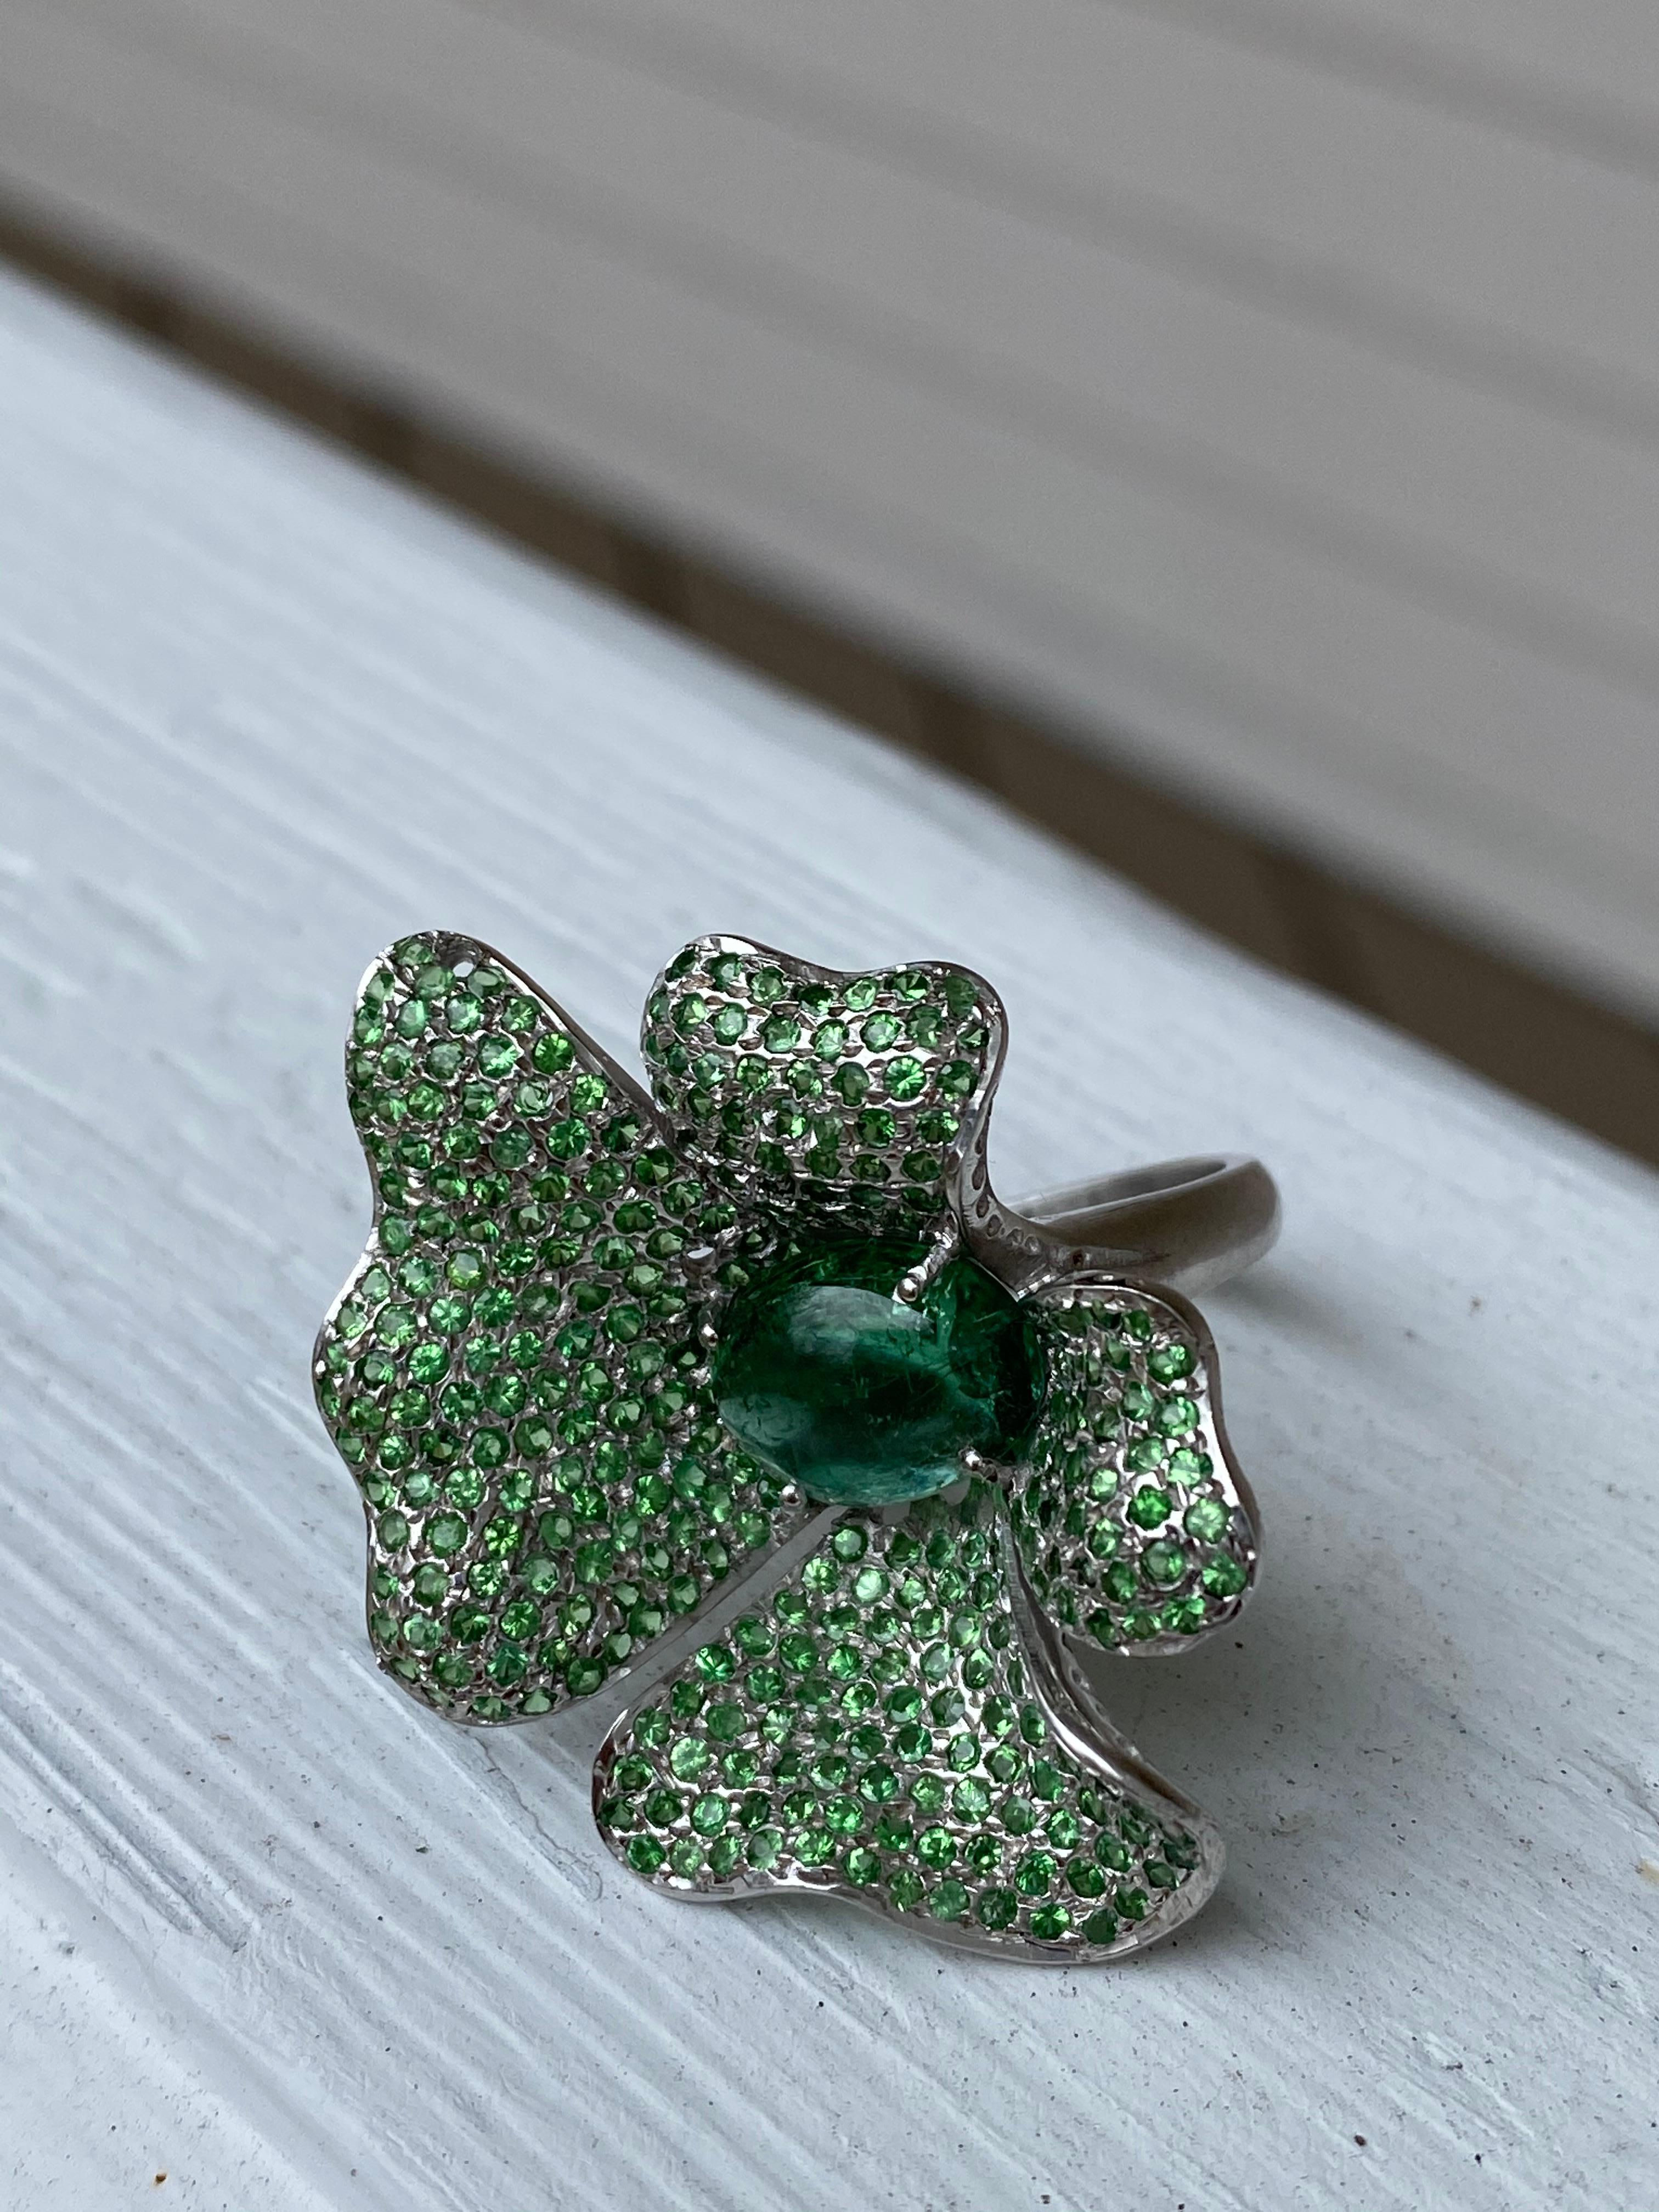 This is a unique ring with an 11x9 oval Green Tourmaline weighing approximately 3.50cts with pave set Green Tsavorite Garnets set in Rhodium Plated Sterling Silver. 
Finger size just under 6.5 for US finger size. The Hardness of this gemstone is 7